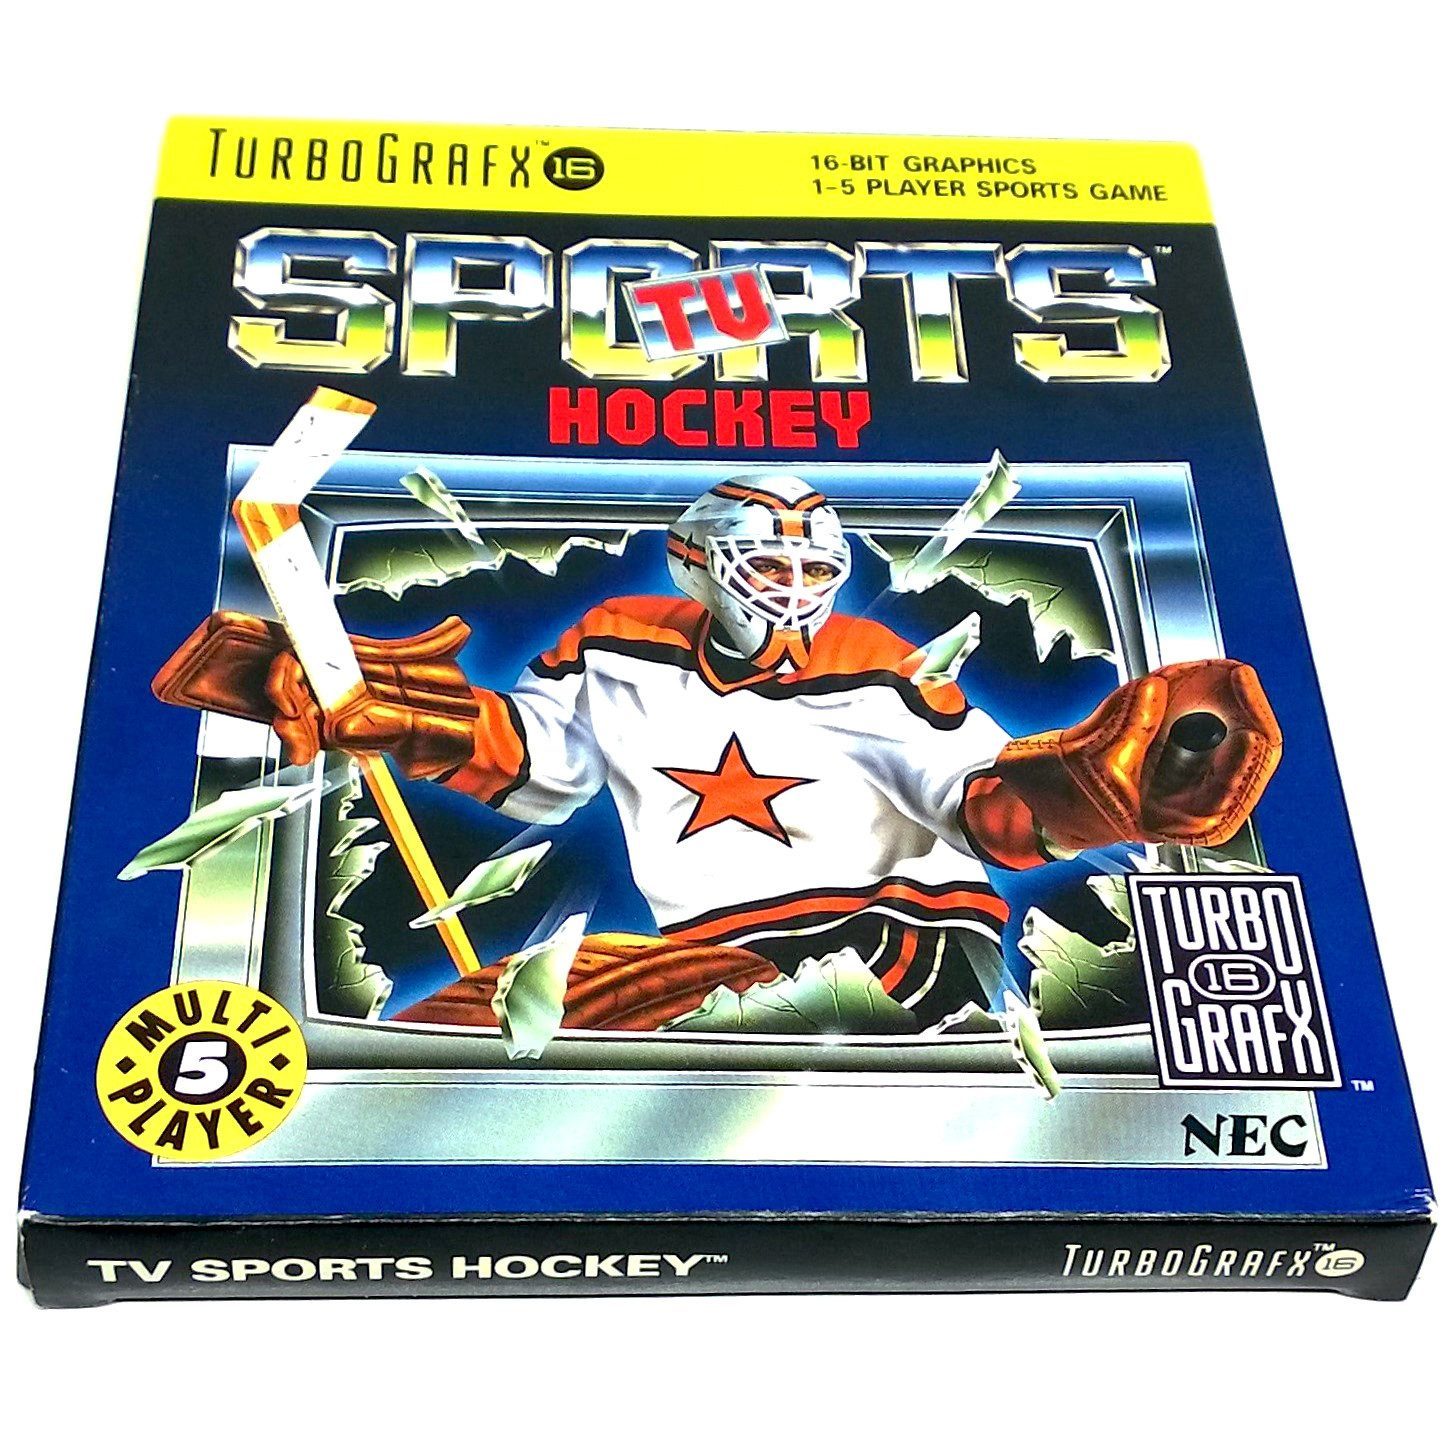 TV Sports Hockey for TurboGrafx-16 - Front of box